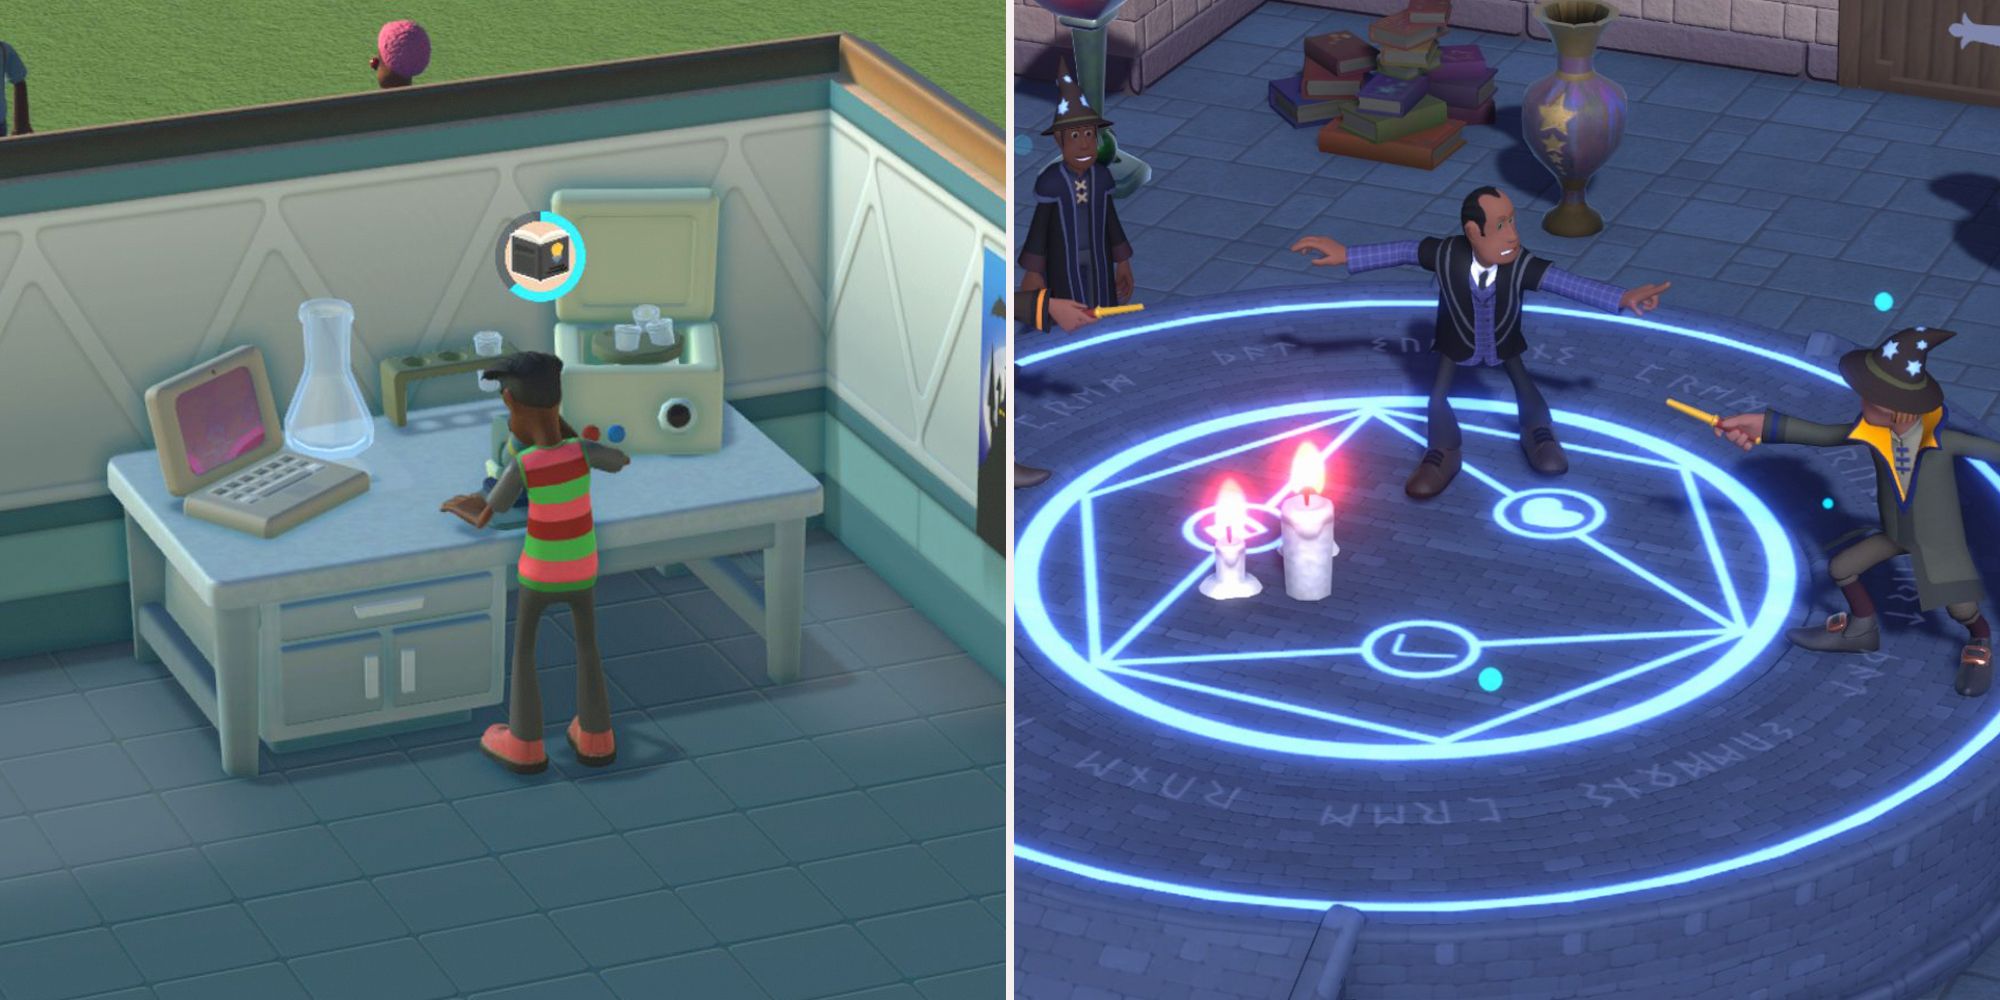 Two images. The left is a student using a desk for a class. There's a laptop and science equipment near the back. The right photo is a student and teacher casting spells during class.